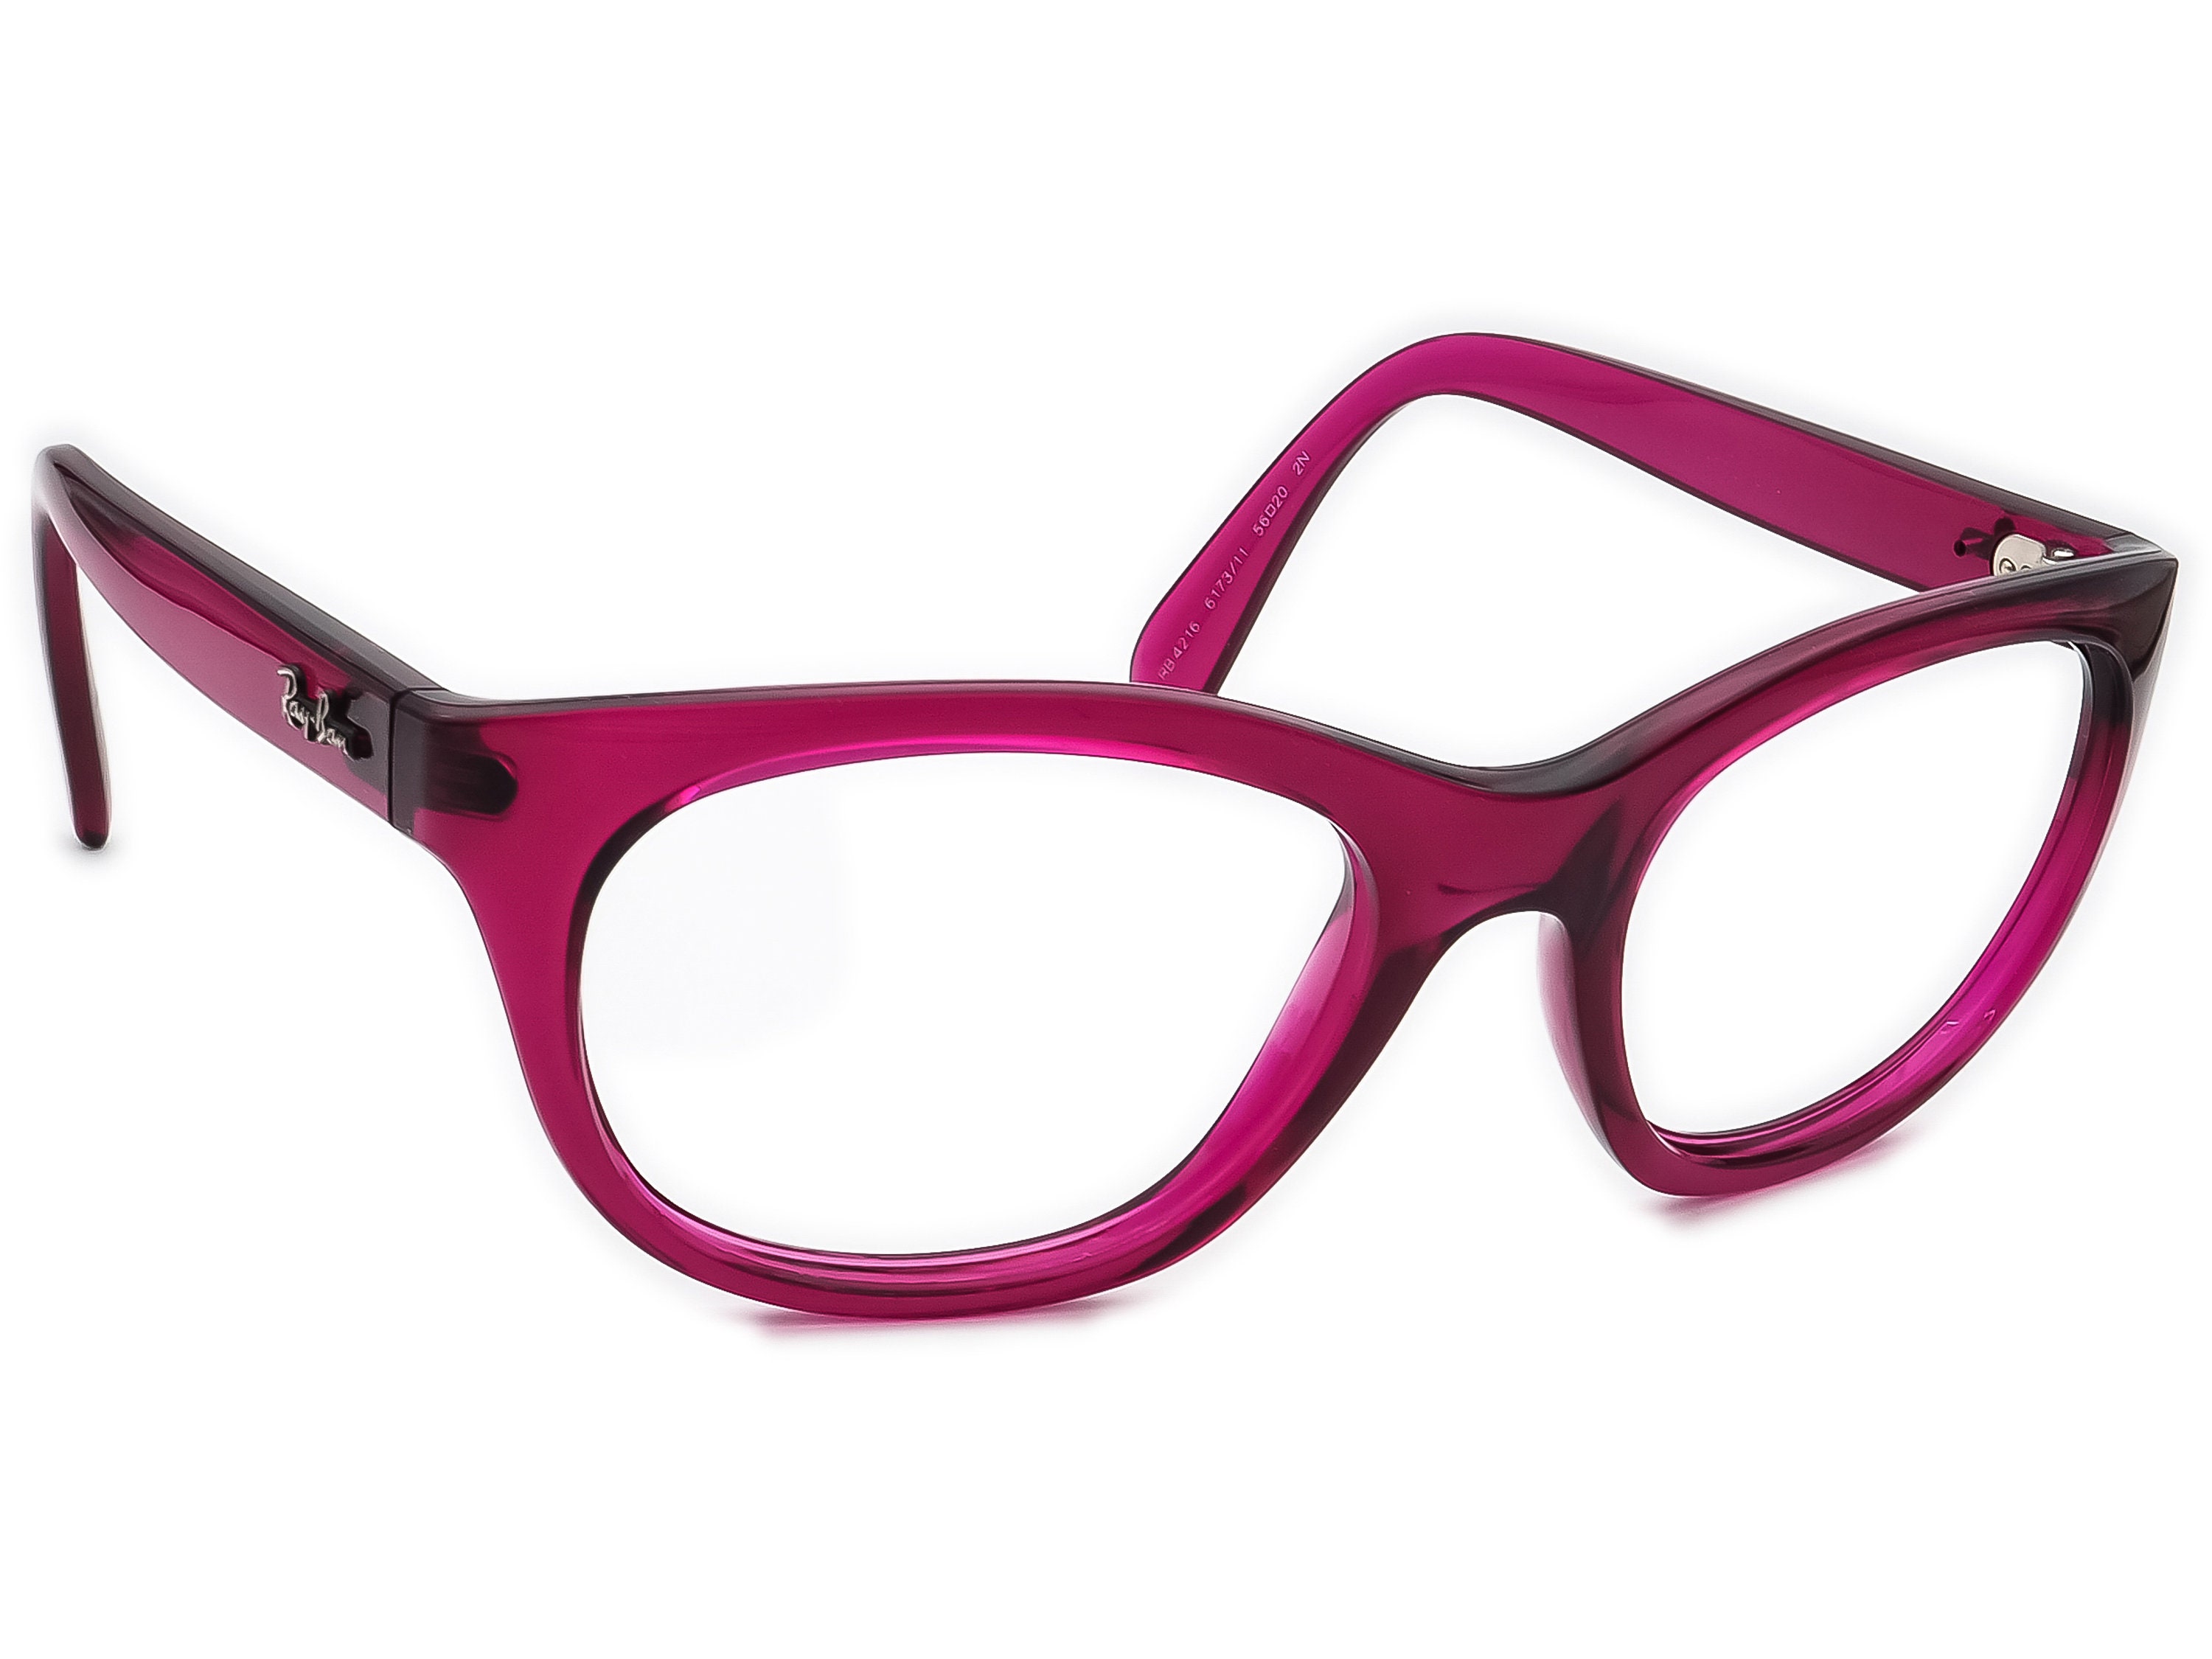 Ray-ban Sunglasses Frame Only RB 4216 6173/11 Pink/purple - Etsy